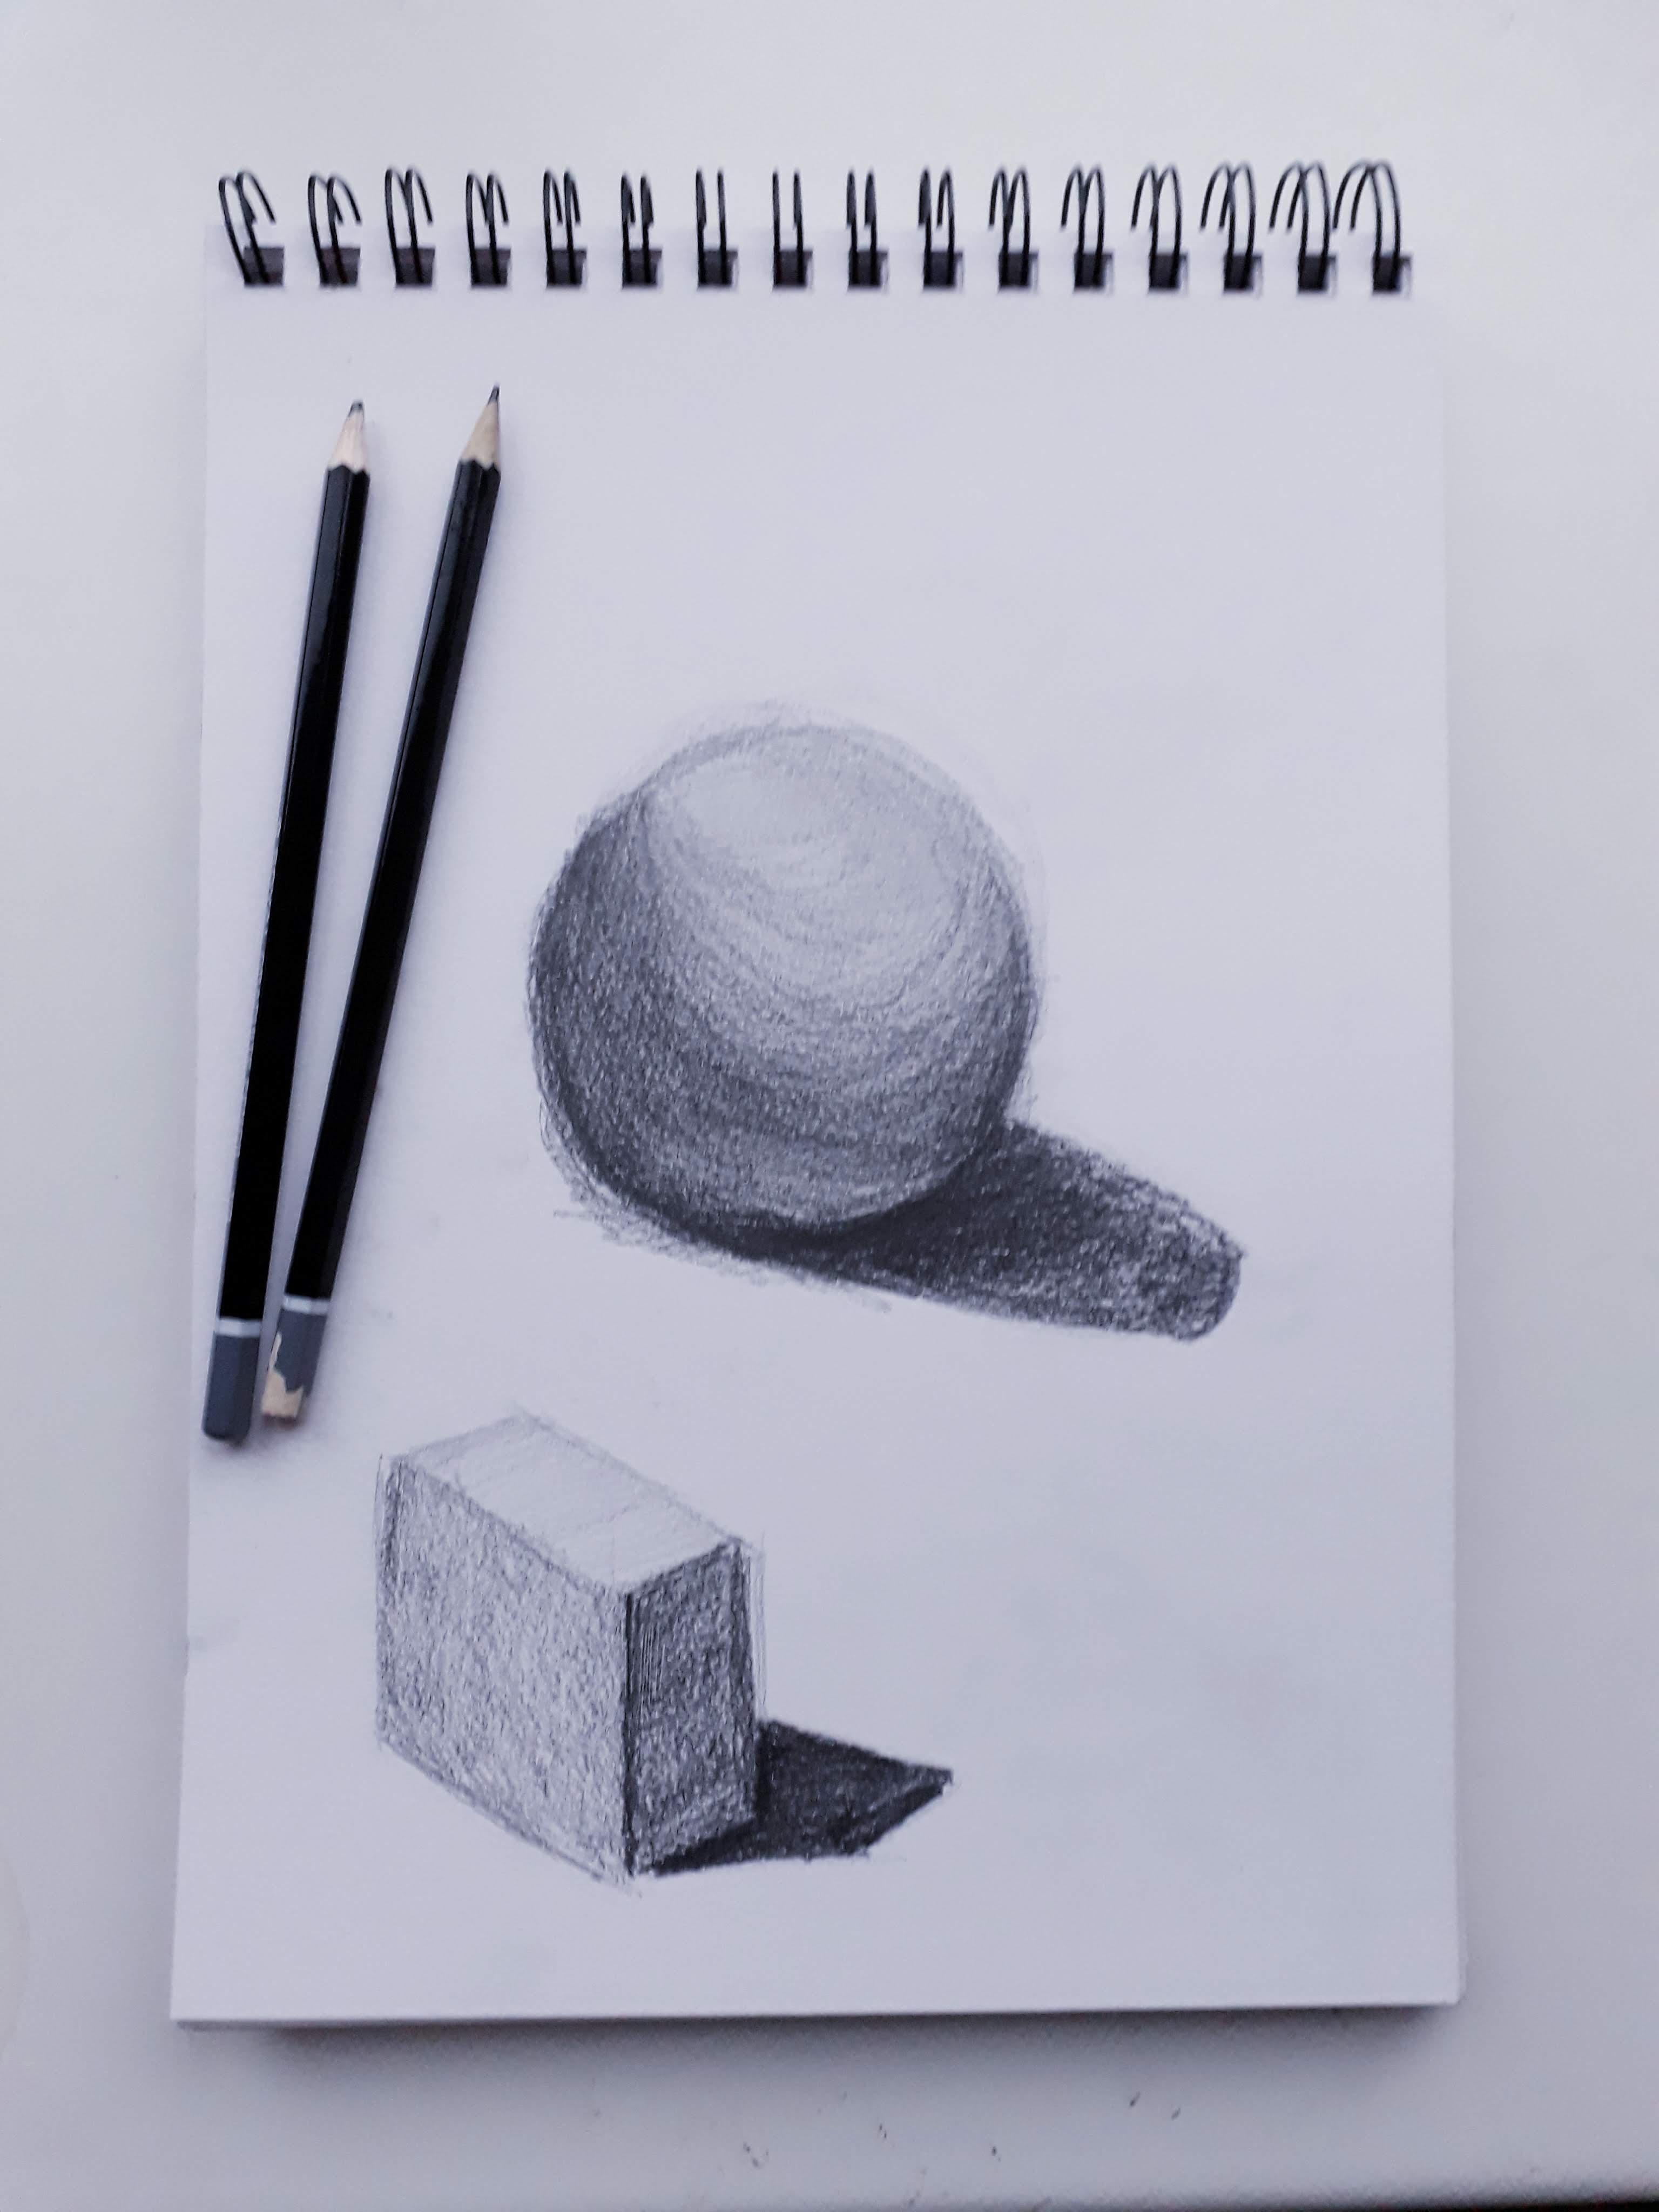 Drawing for Beginners: 26 FREE Basic Drawing Lessons - Artists Network